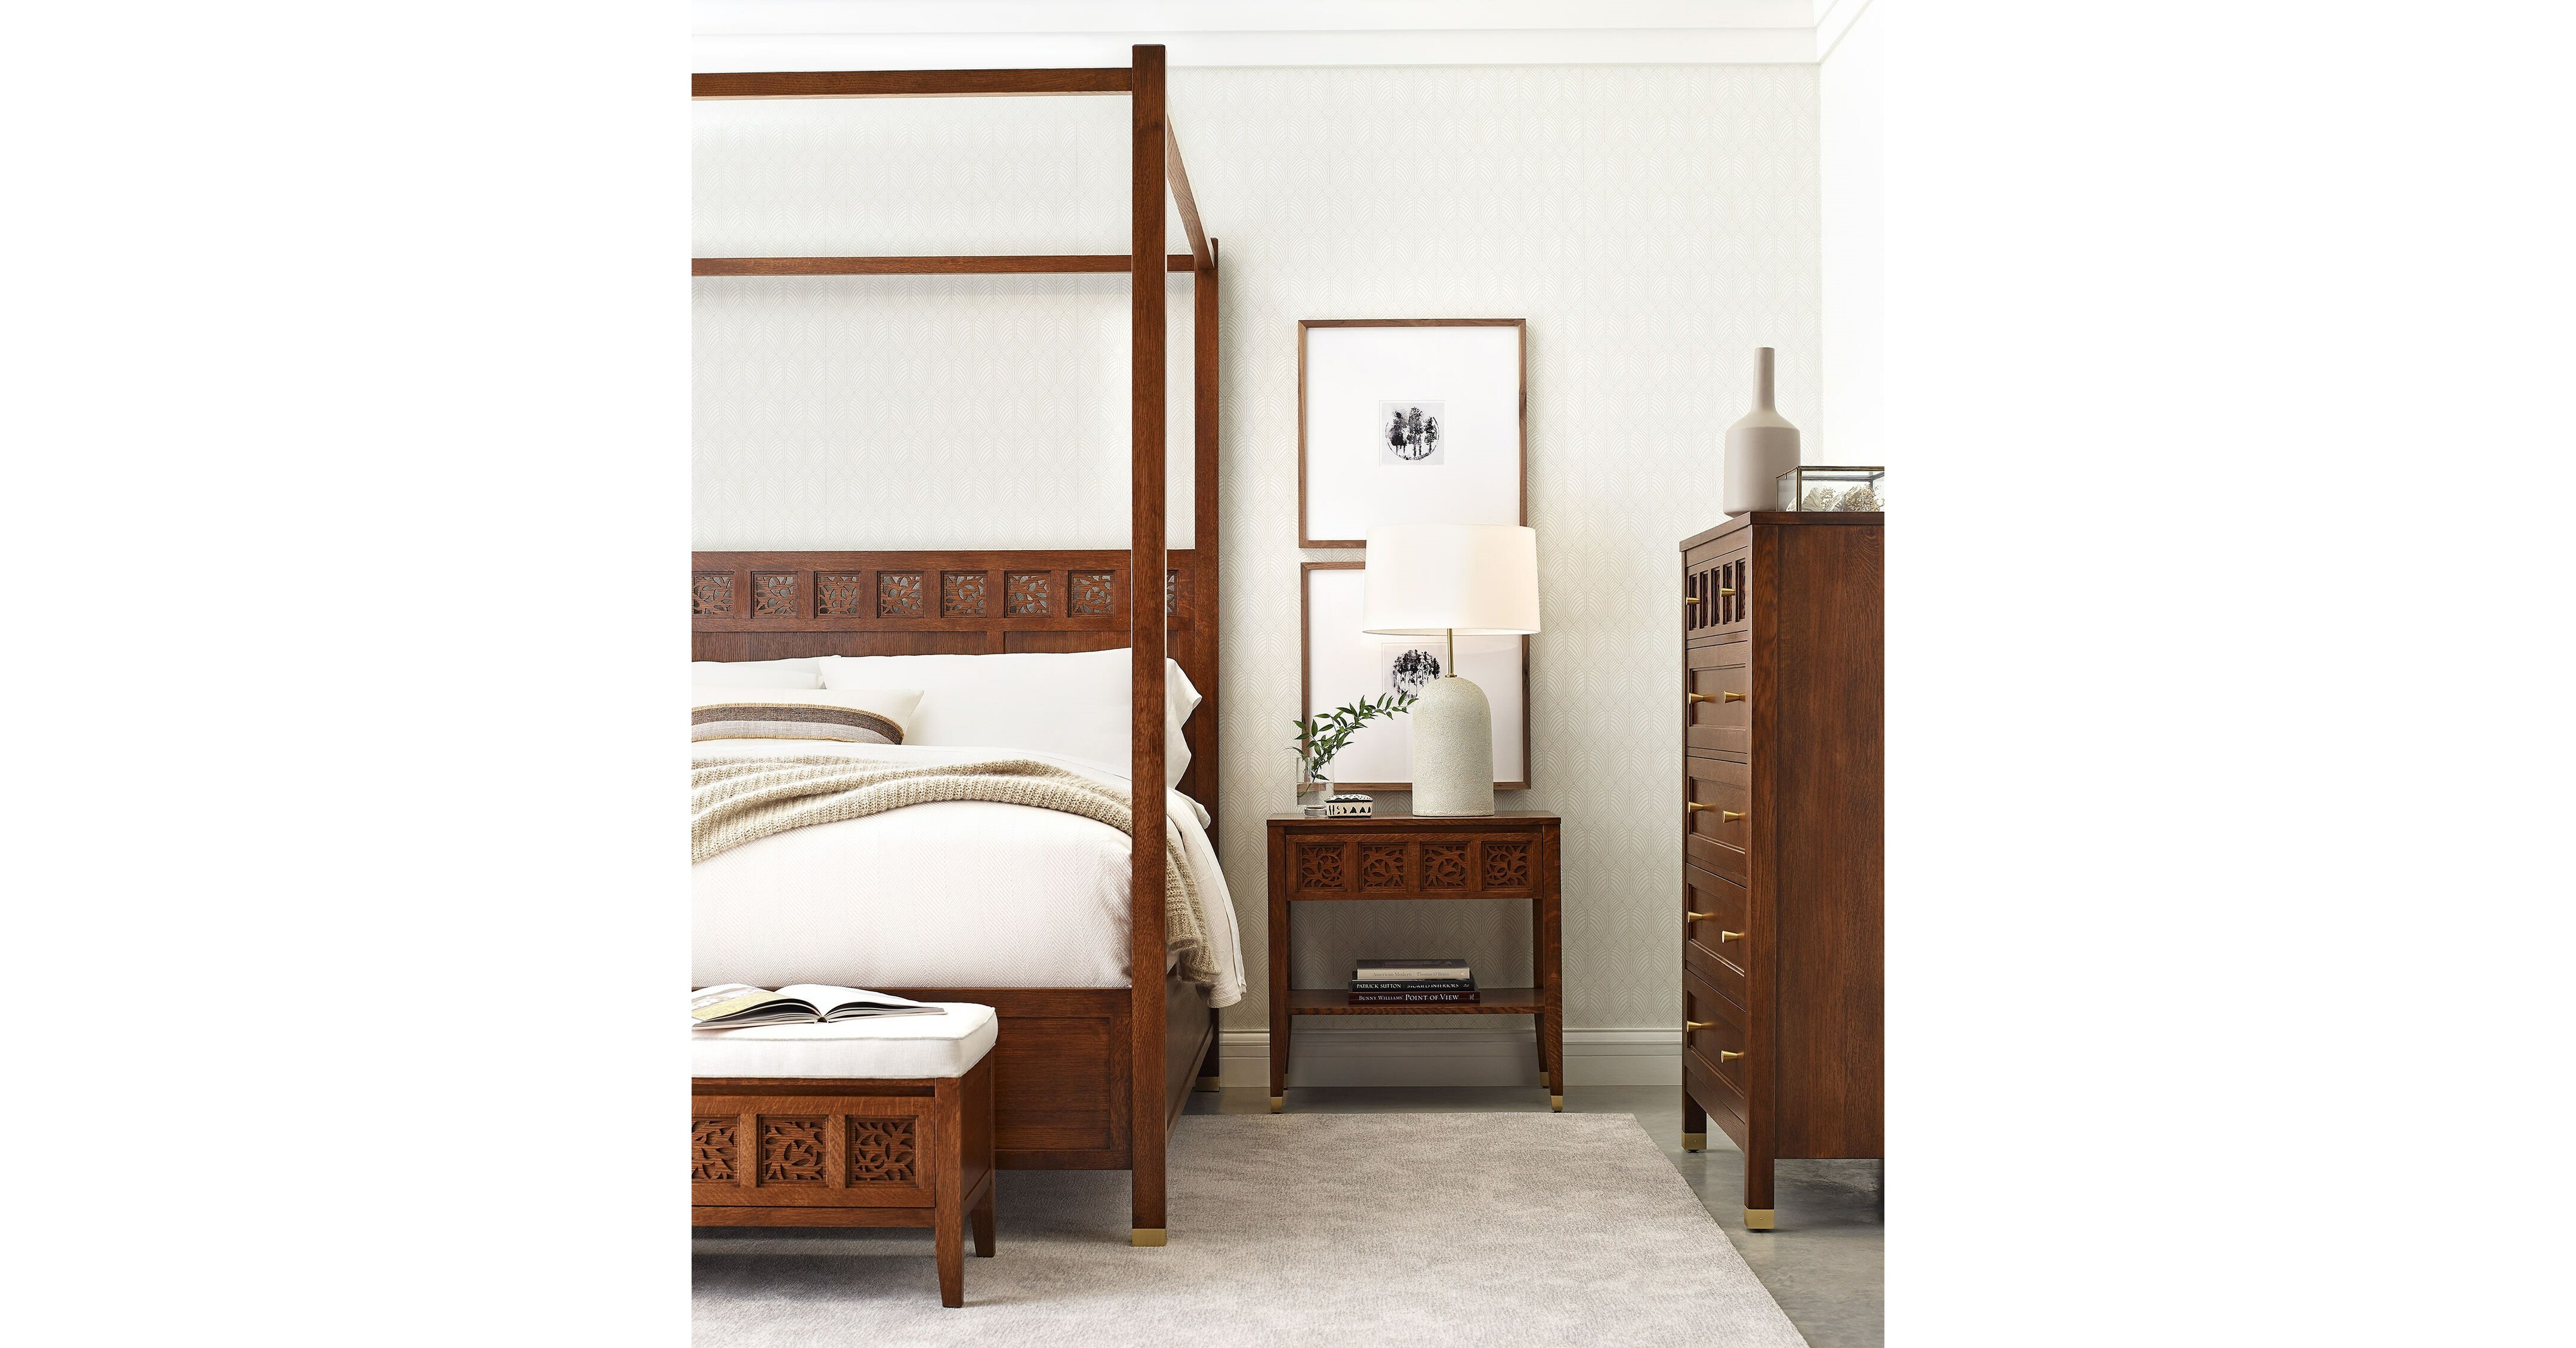 Stickley Celebrates English Arts and Crafts with the New Surrey Hills Collection